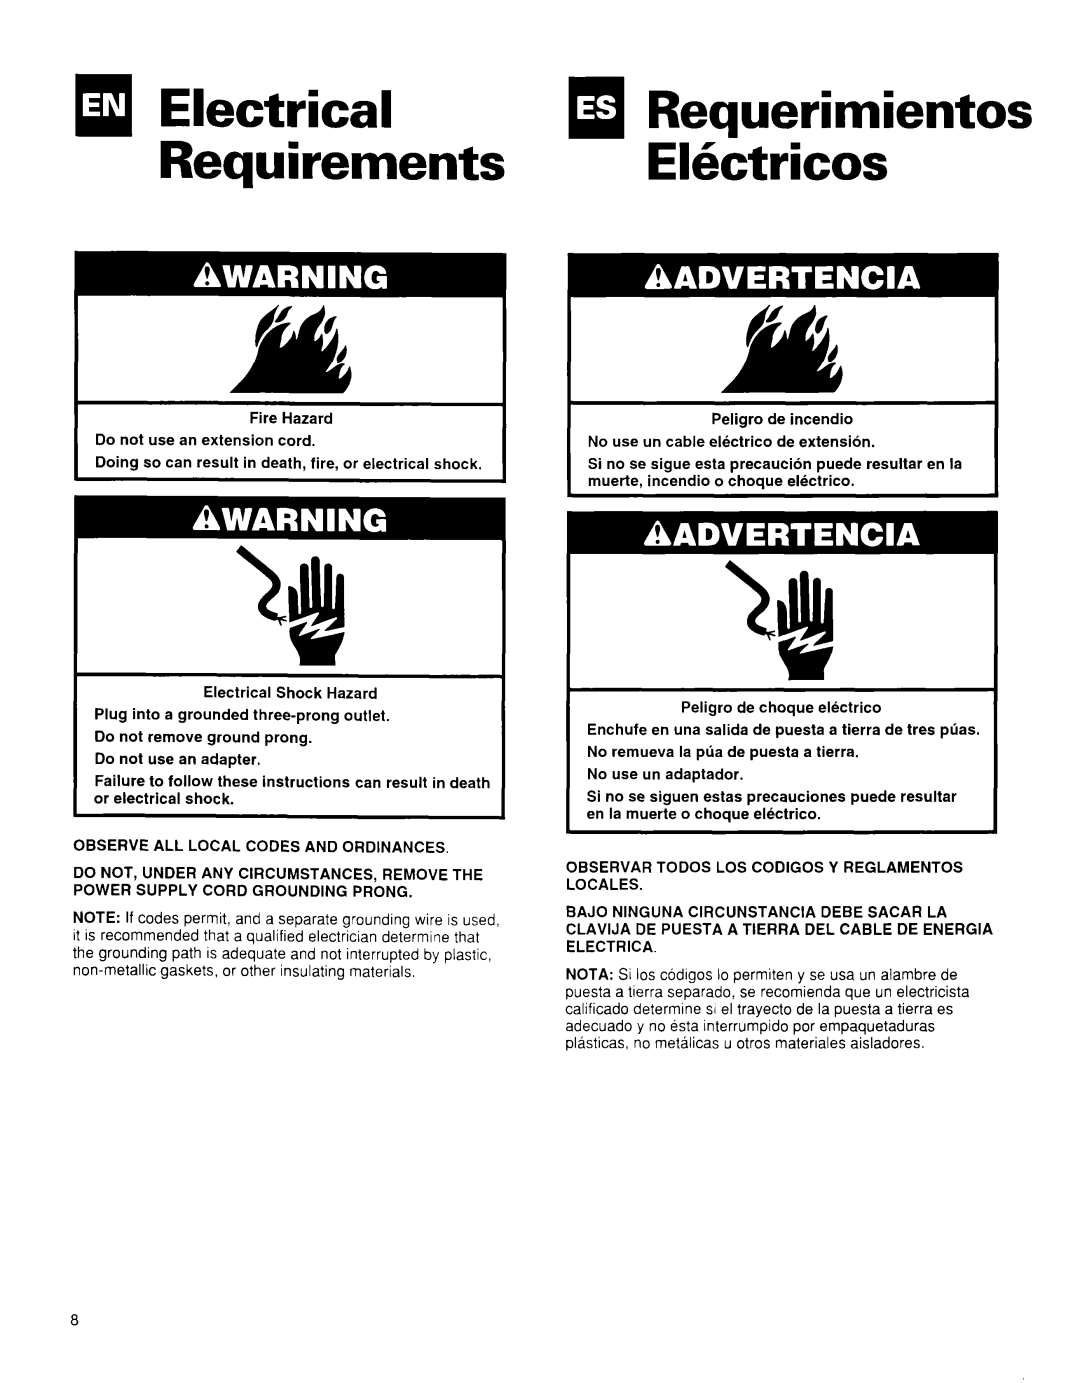 Whirlpool BHAC0600BS0 manual q Requerimientos Elktricos, q Electrical Requirements 